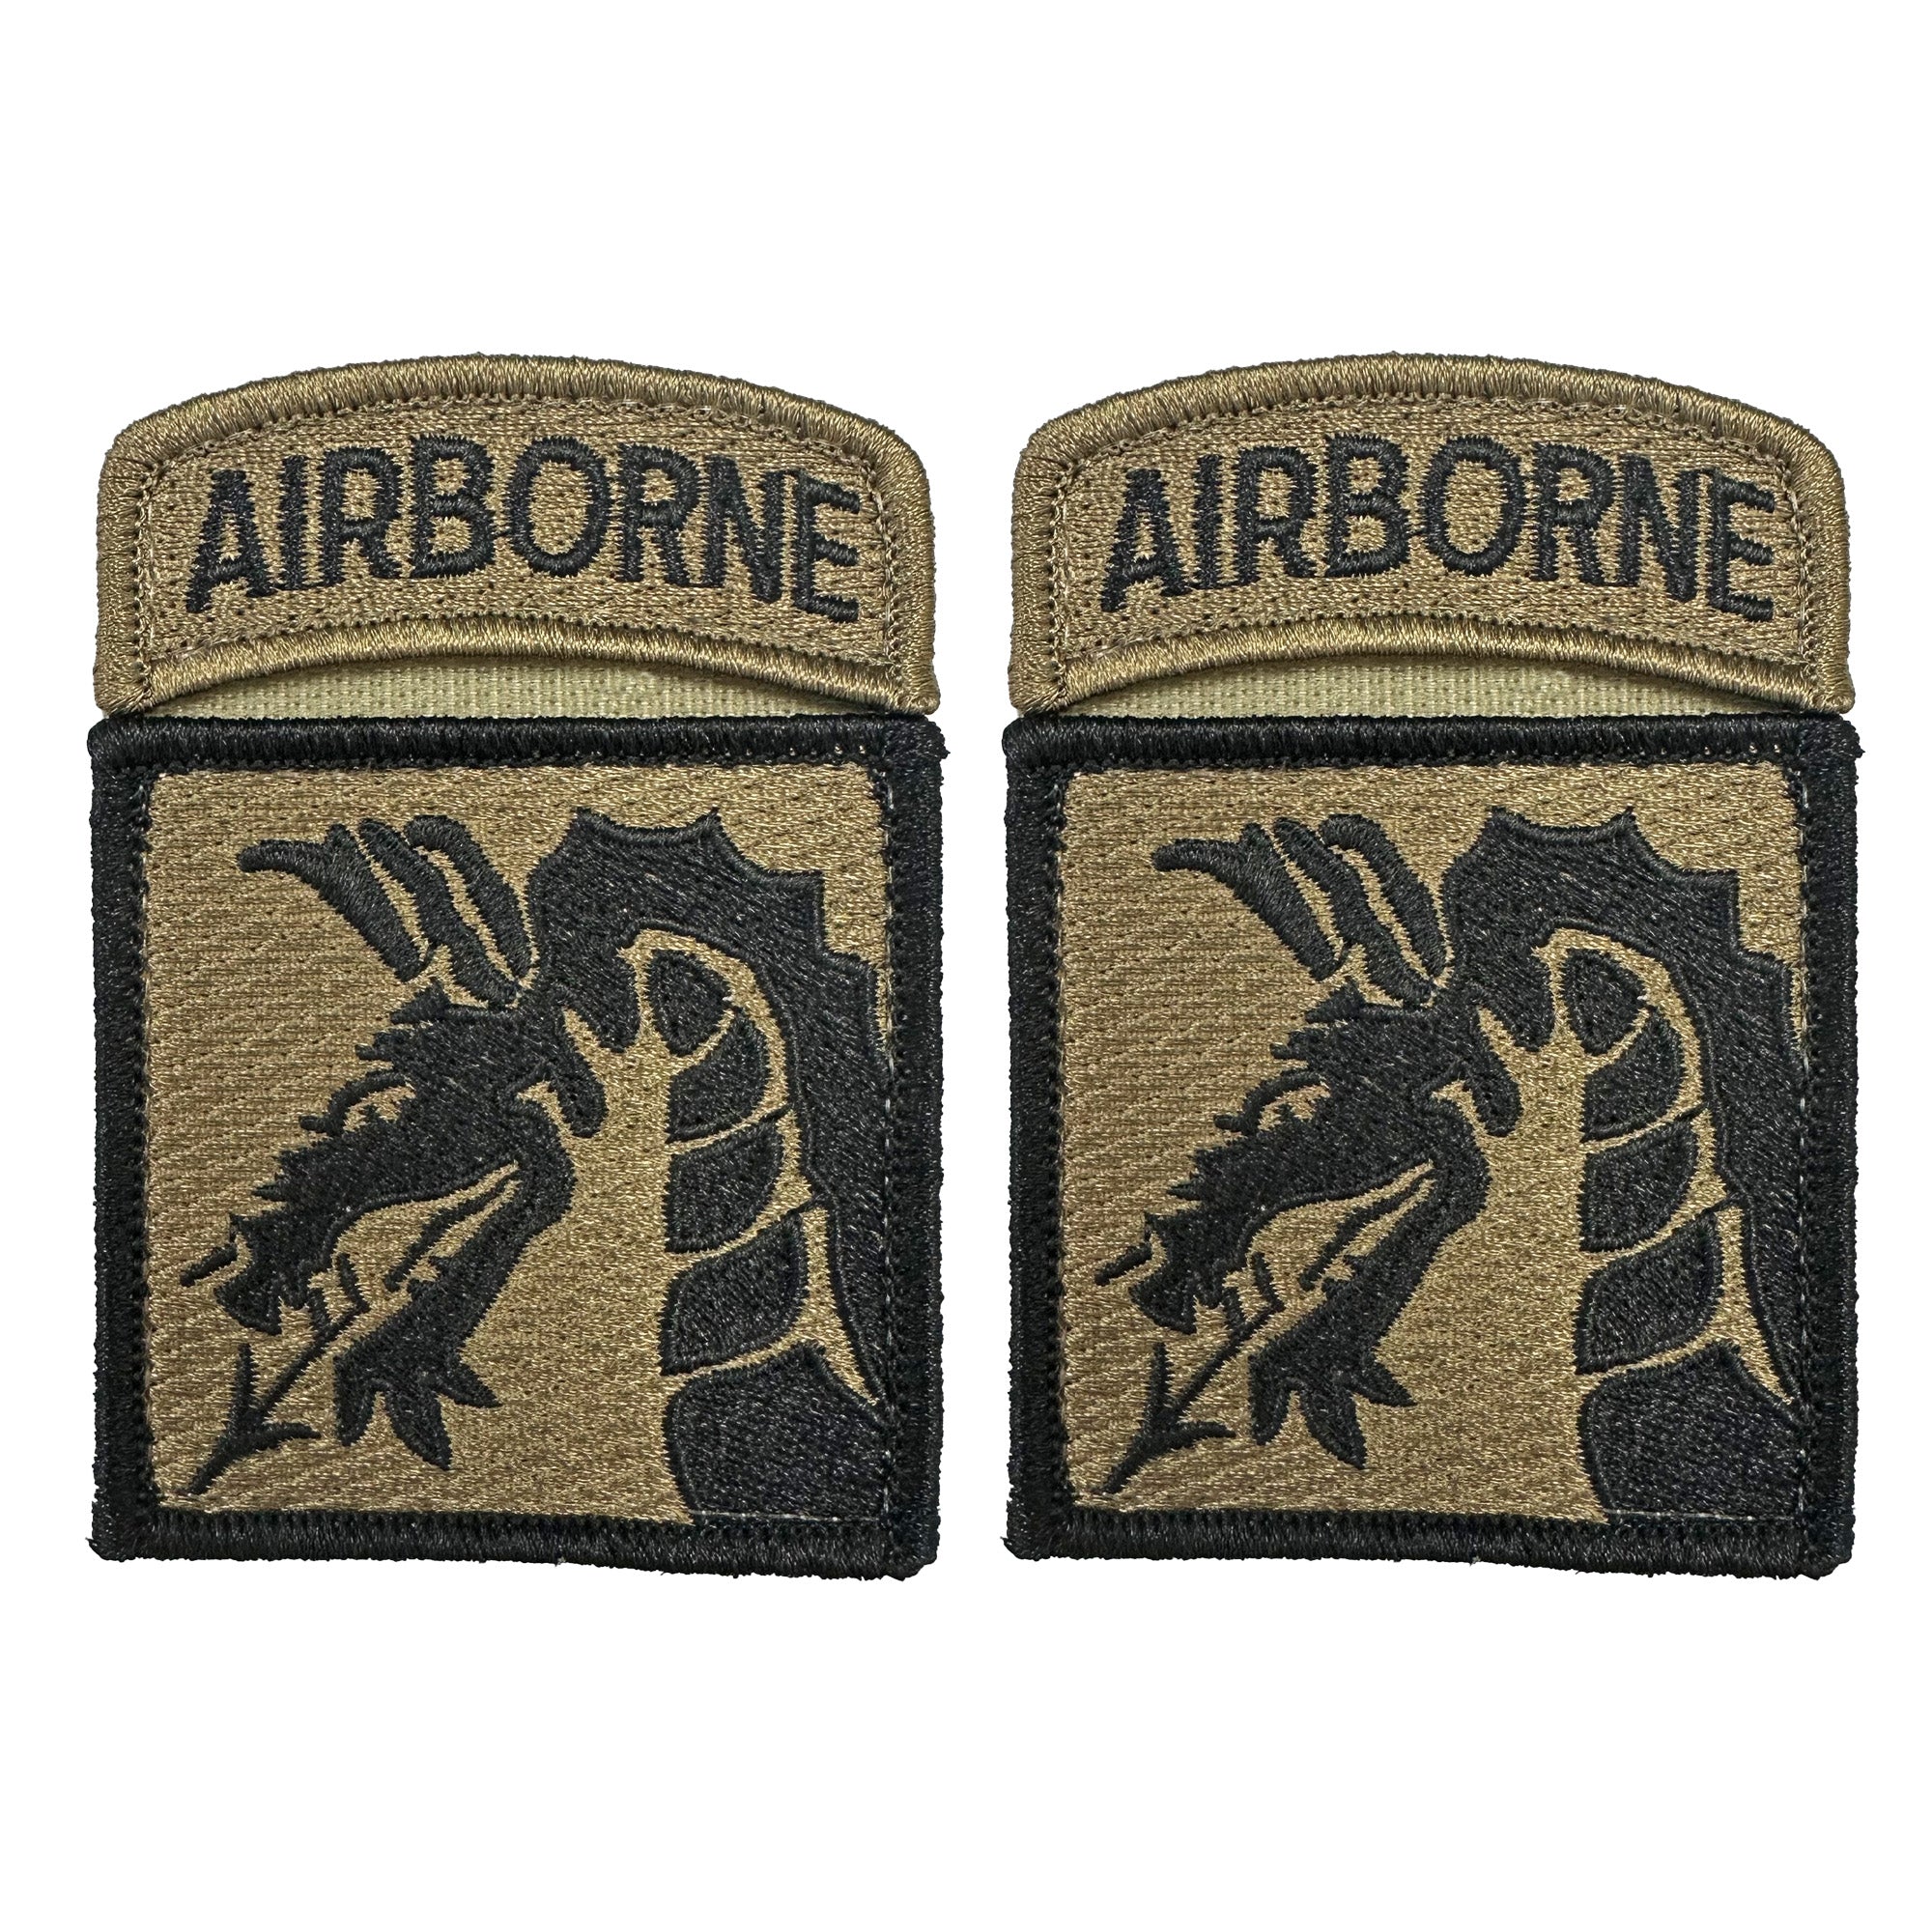 18th Airborne OCP Patch with Hook Fastener and Airborne Tab (pair) - Insignia Depot